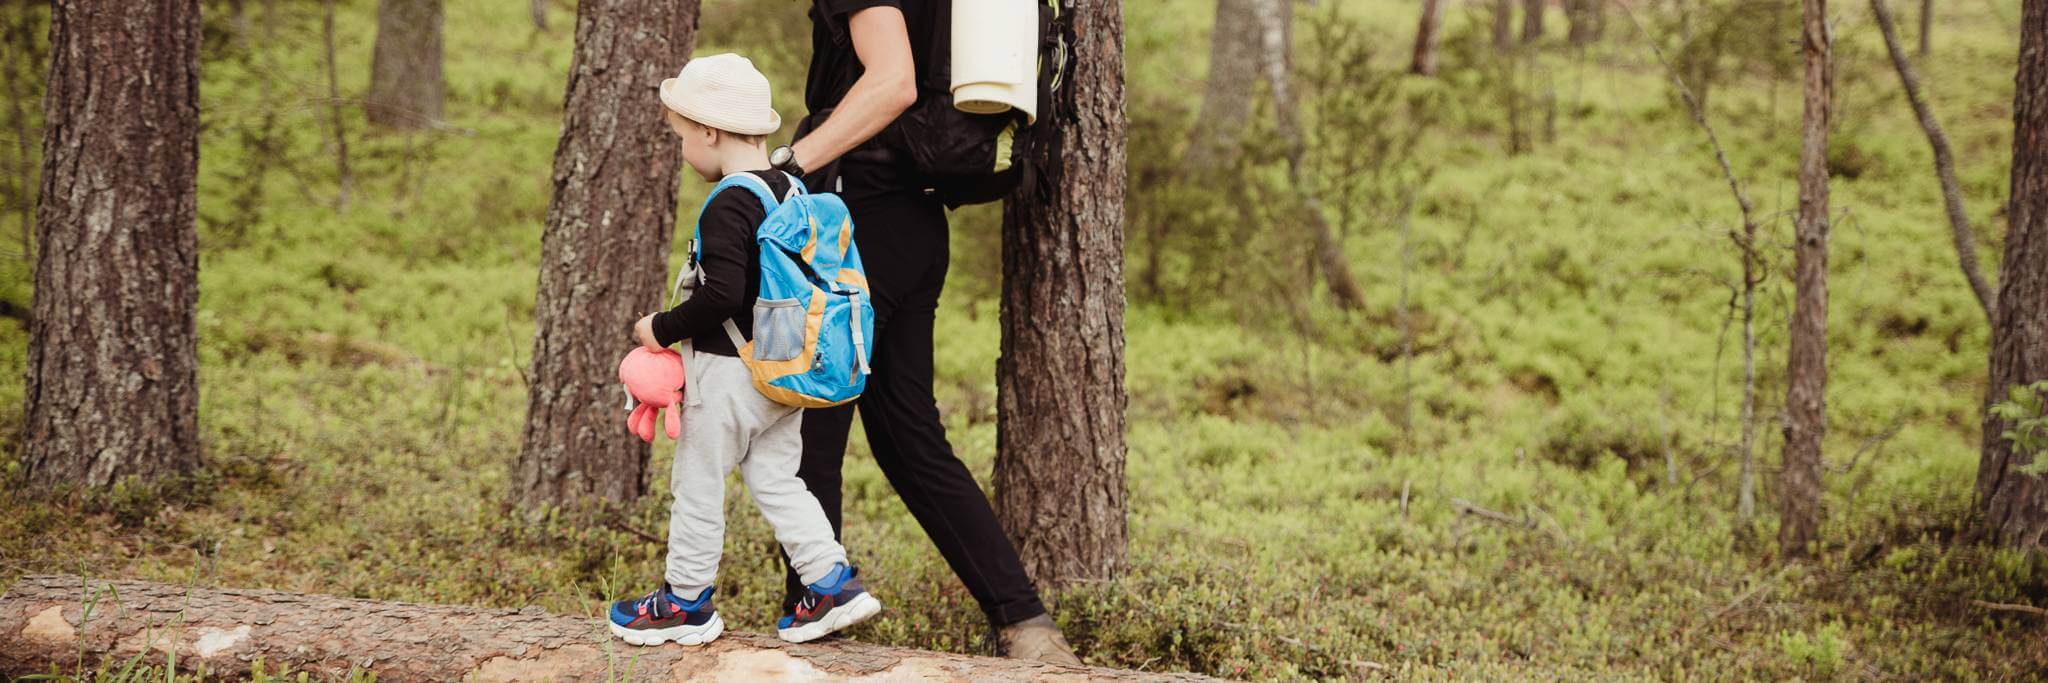 A boy is holding his father's hand and going to hike in the forest